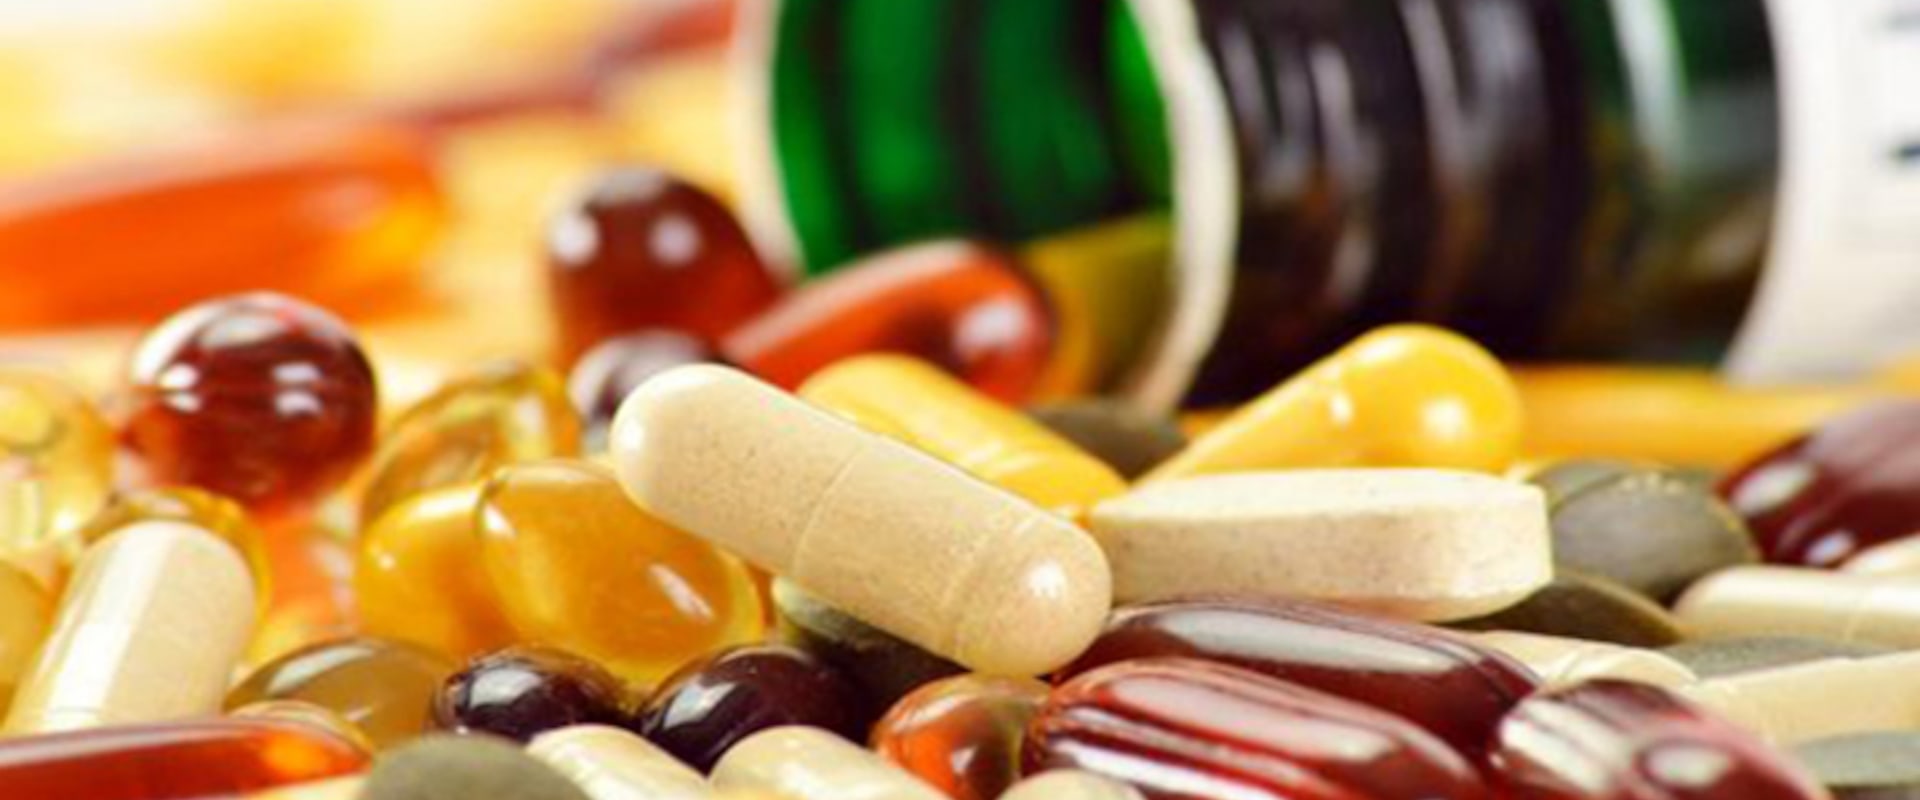 How would you learn about the safety of a supplement?